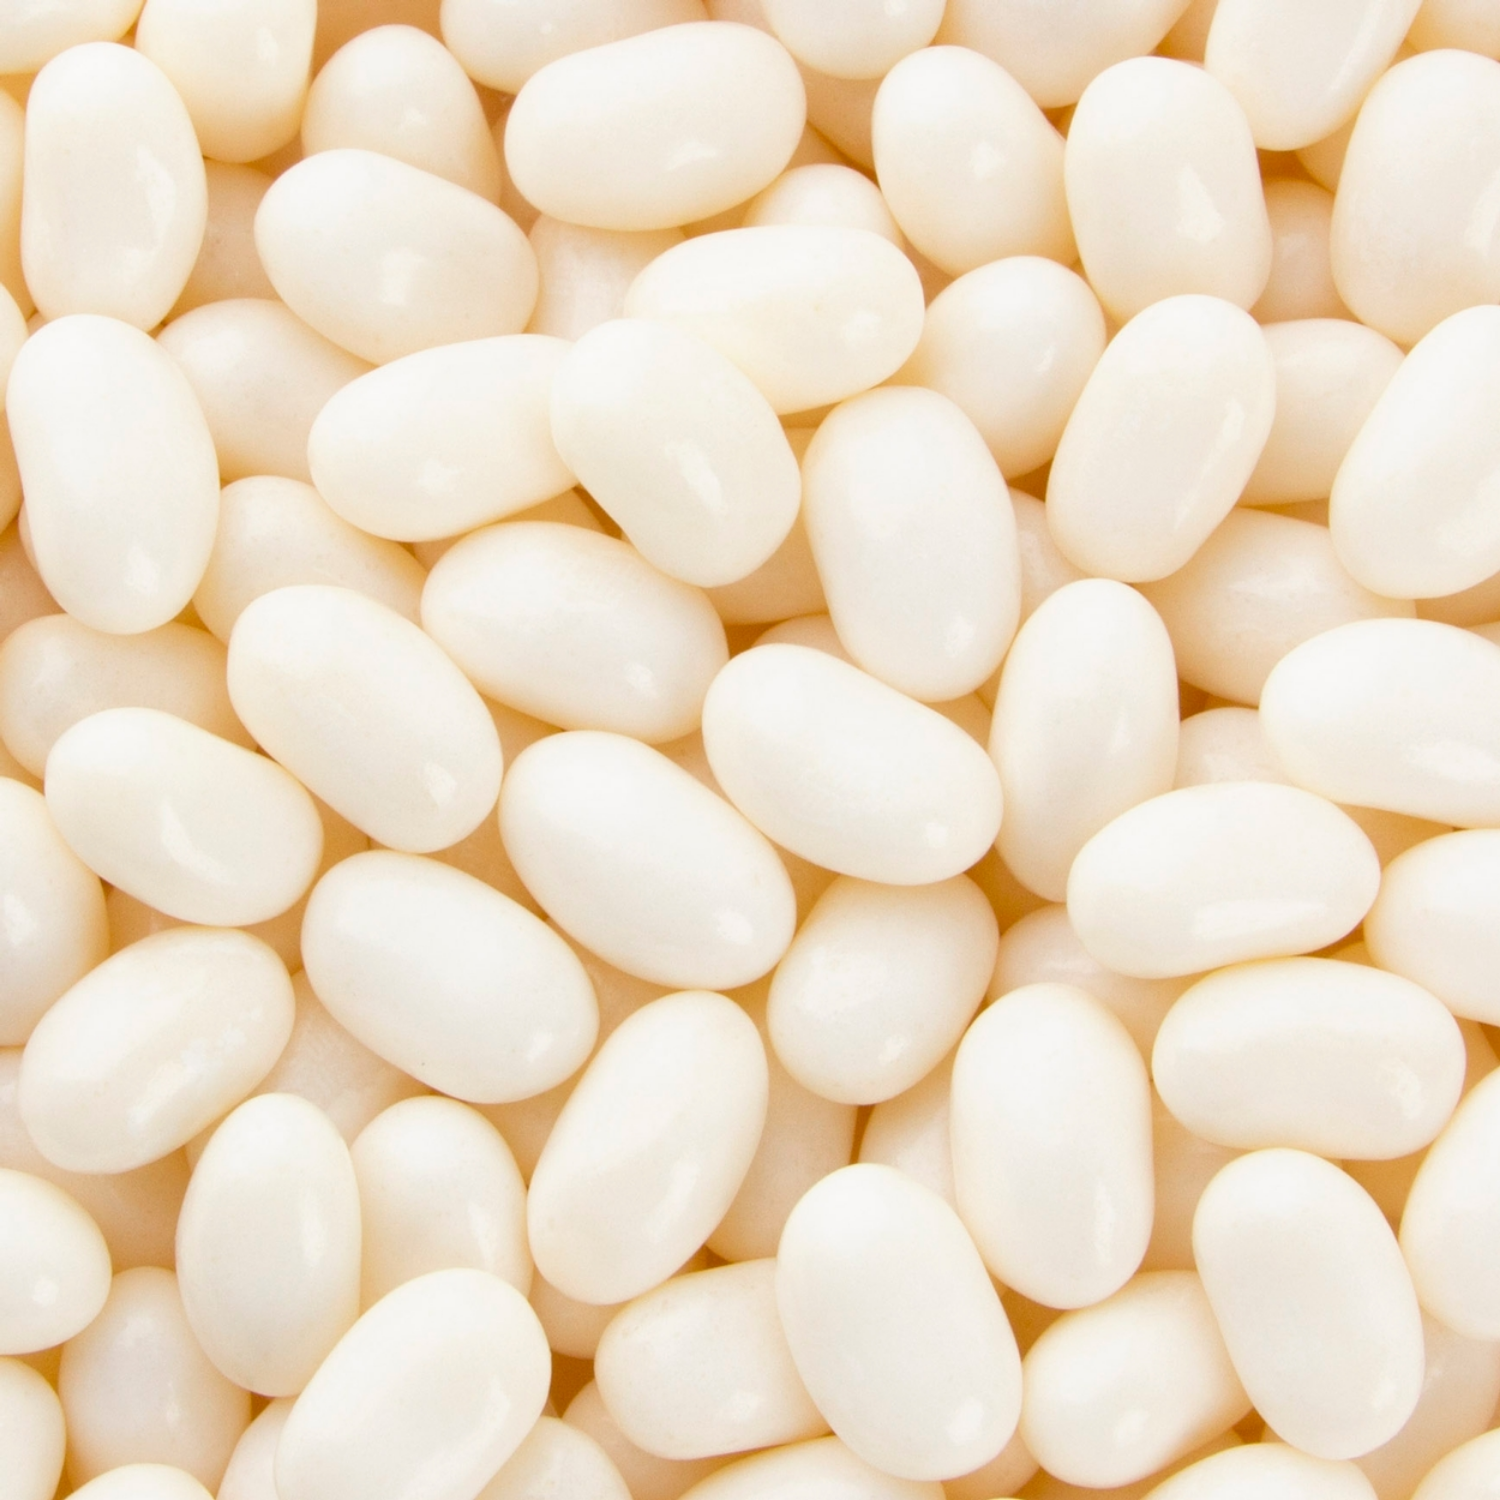 Coconut Jelly Beans - 2.2 Pounds